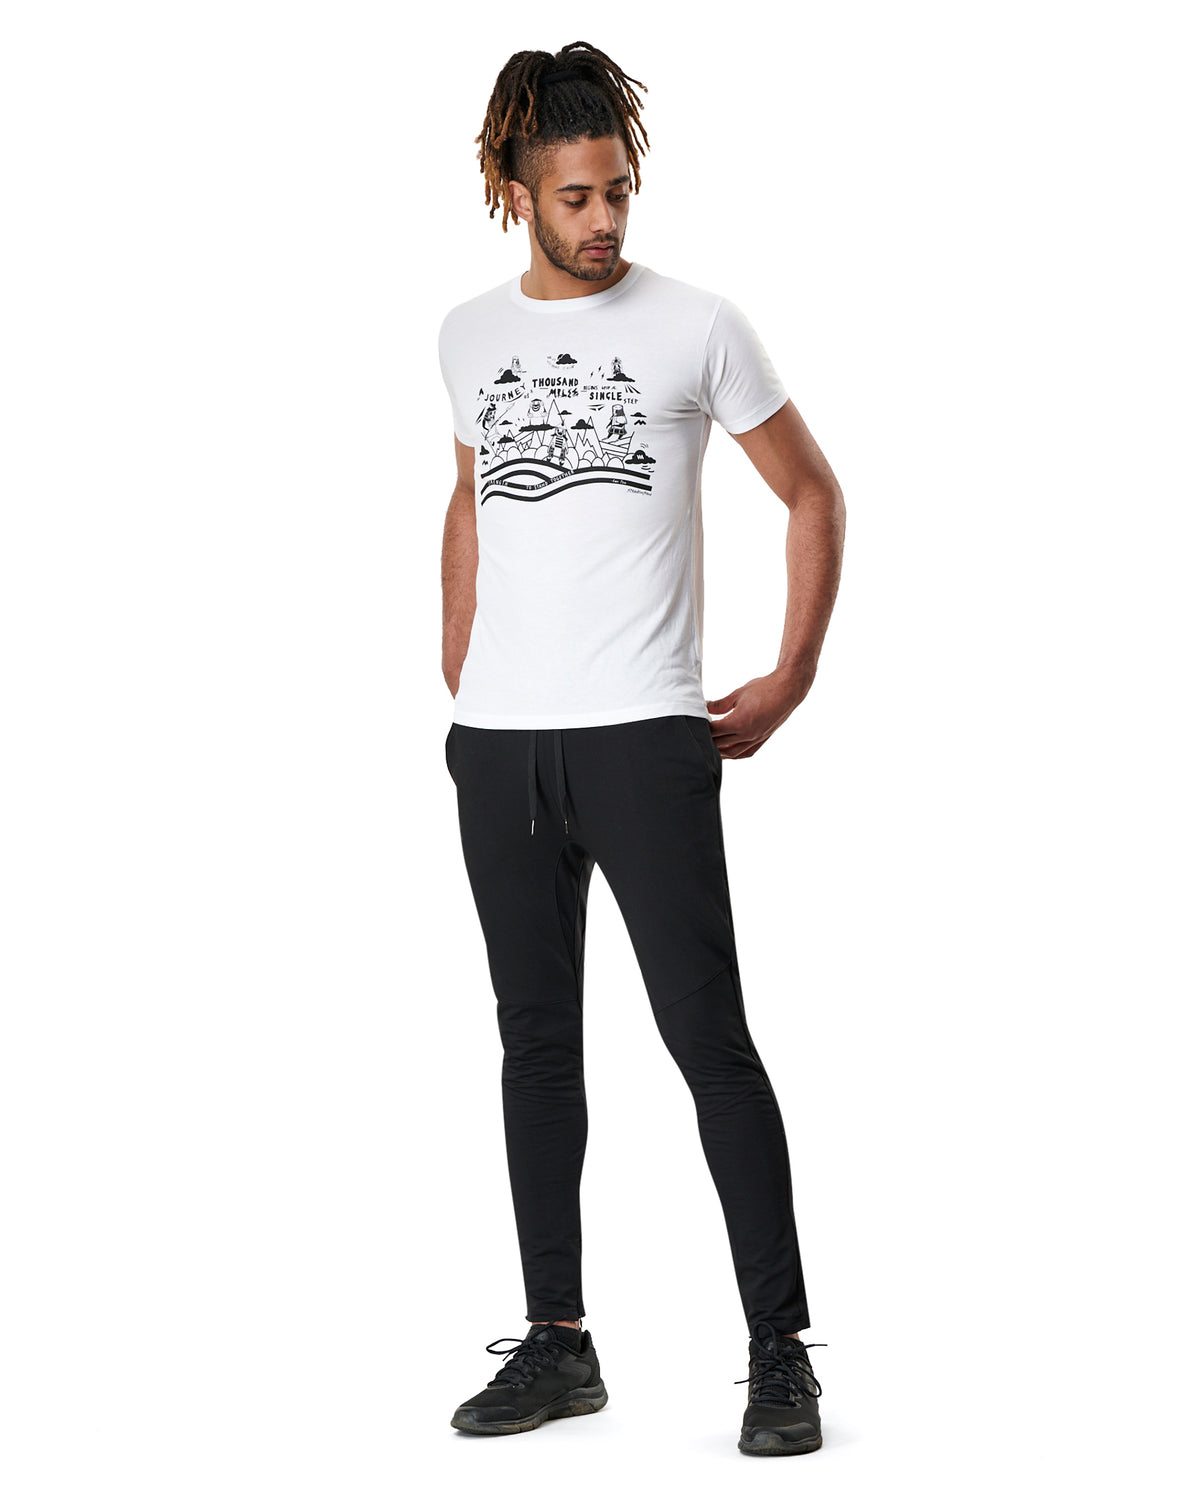 man in white mens yoga t-shirt with print and black yoga pants by warrior addict 